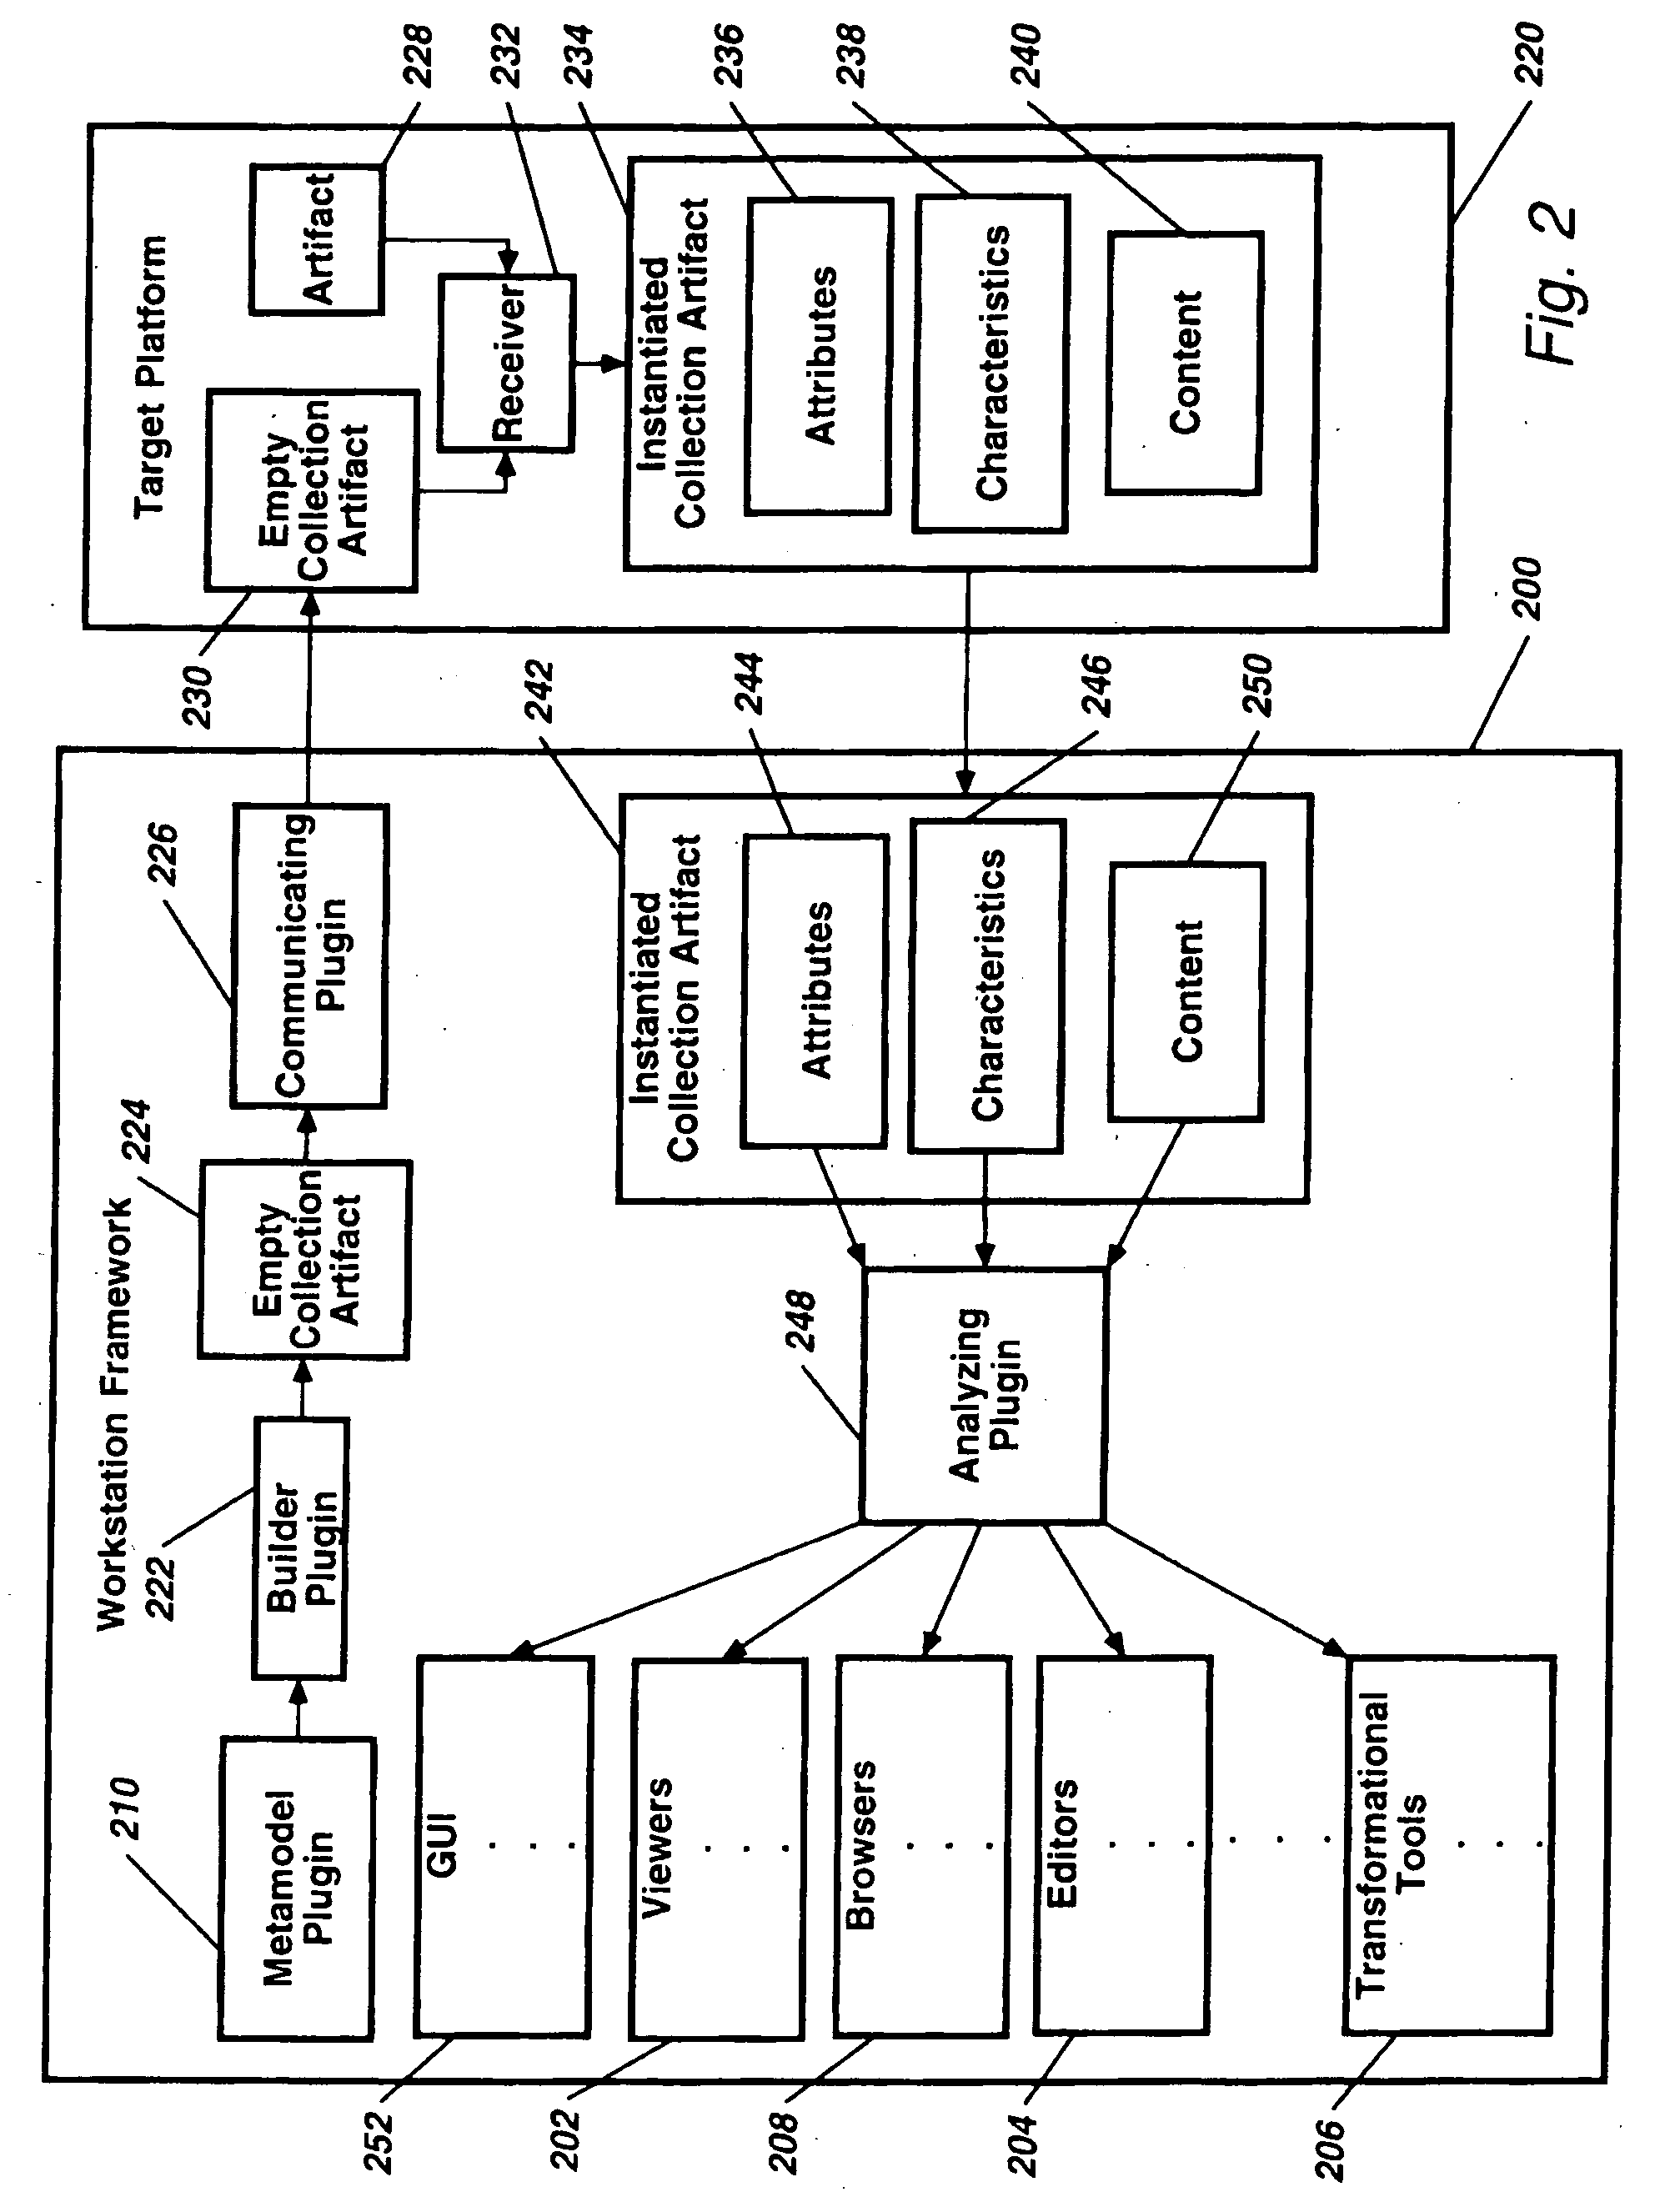 Trusted access by an extendible framework method, system, article of manufacture, and computer program product